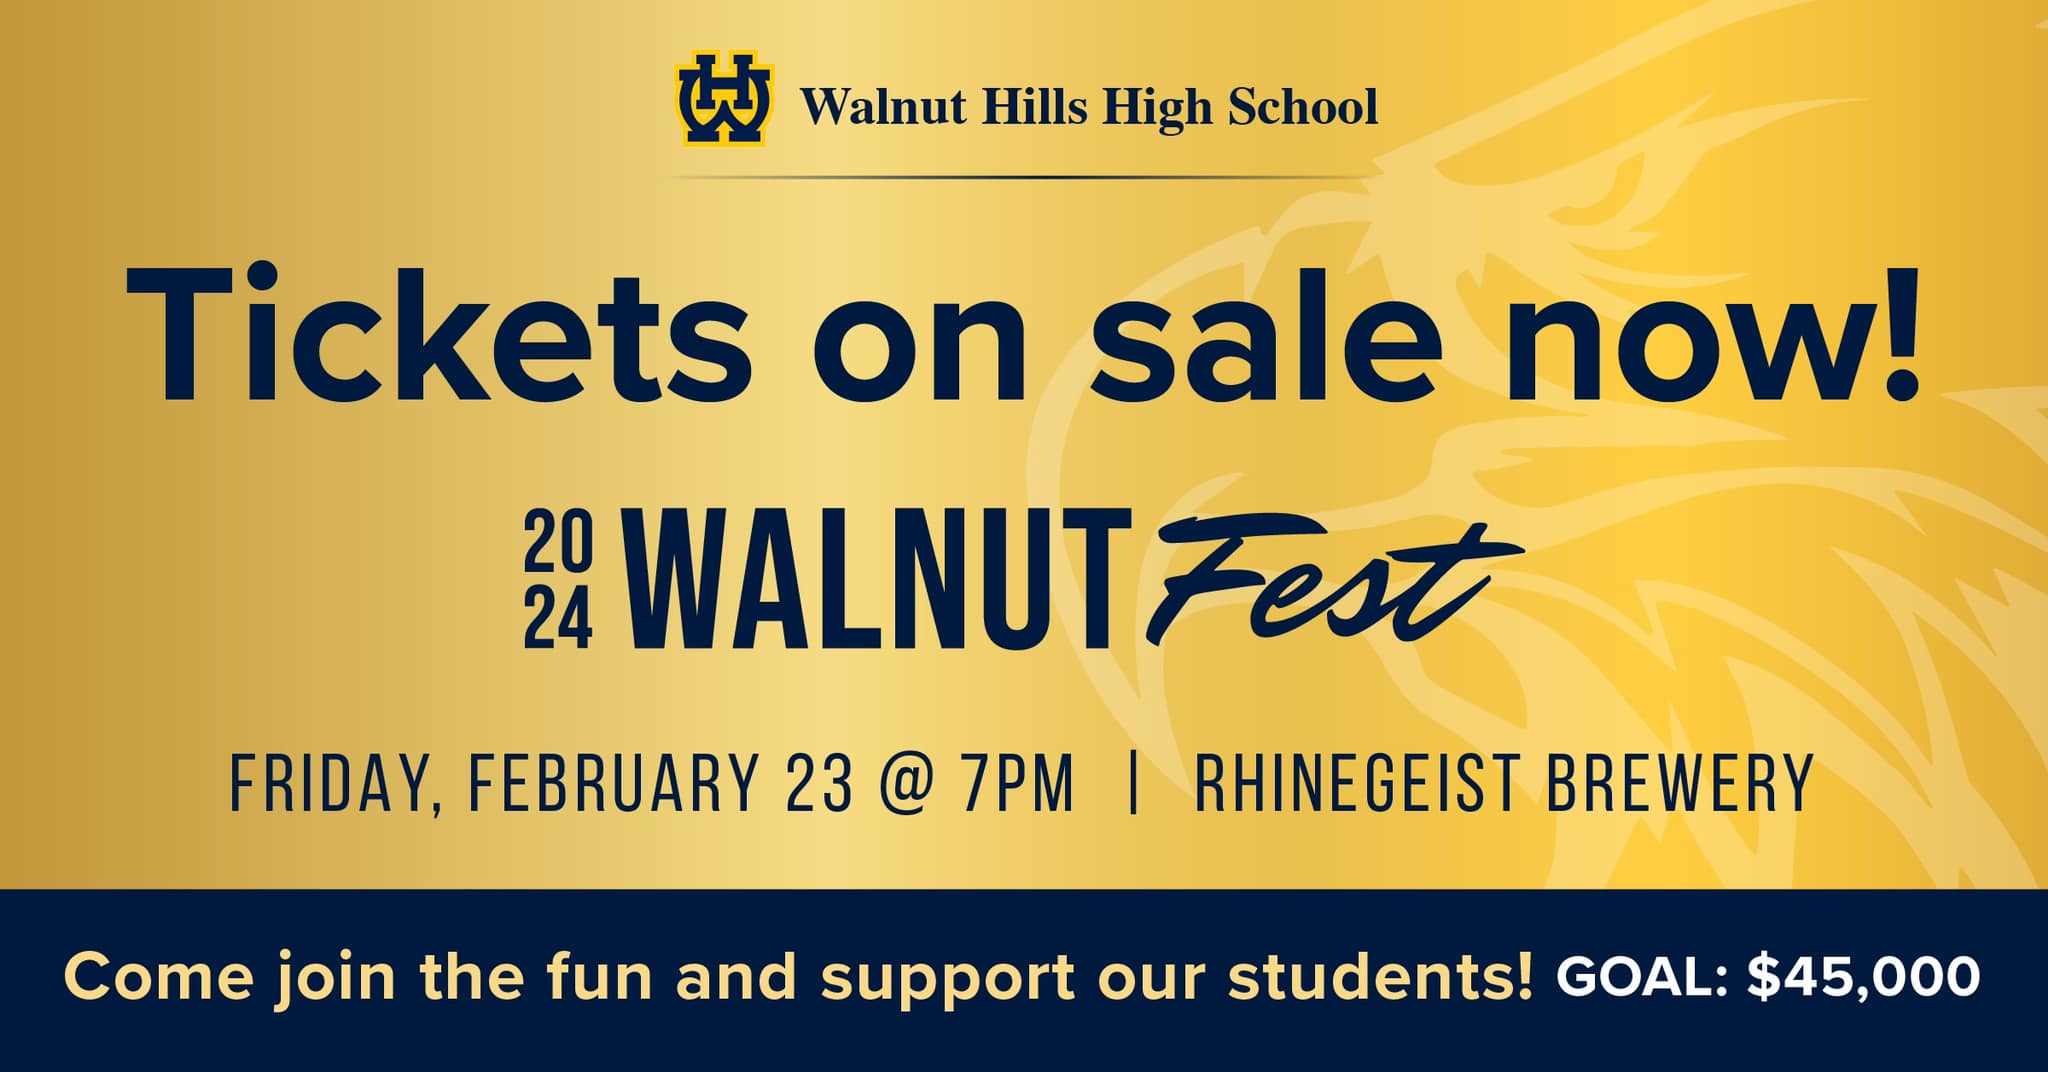 Buy WalnutFest Tickets at this link!